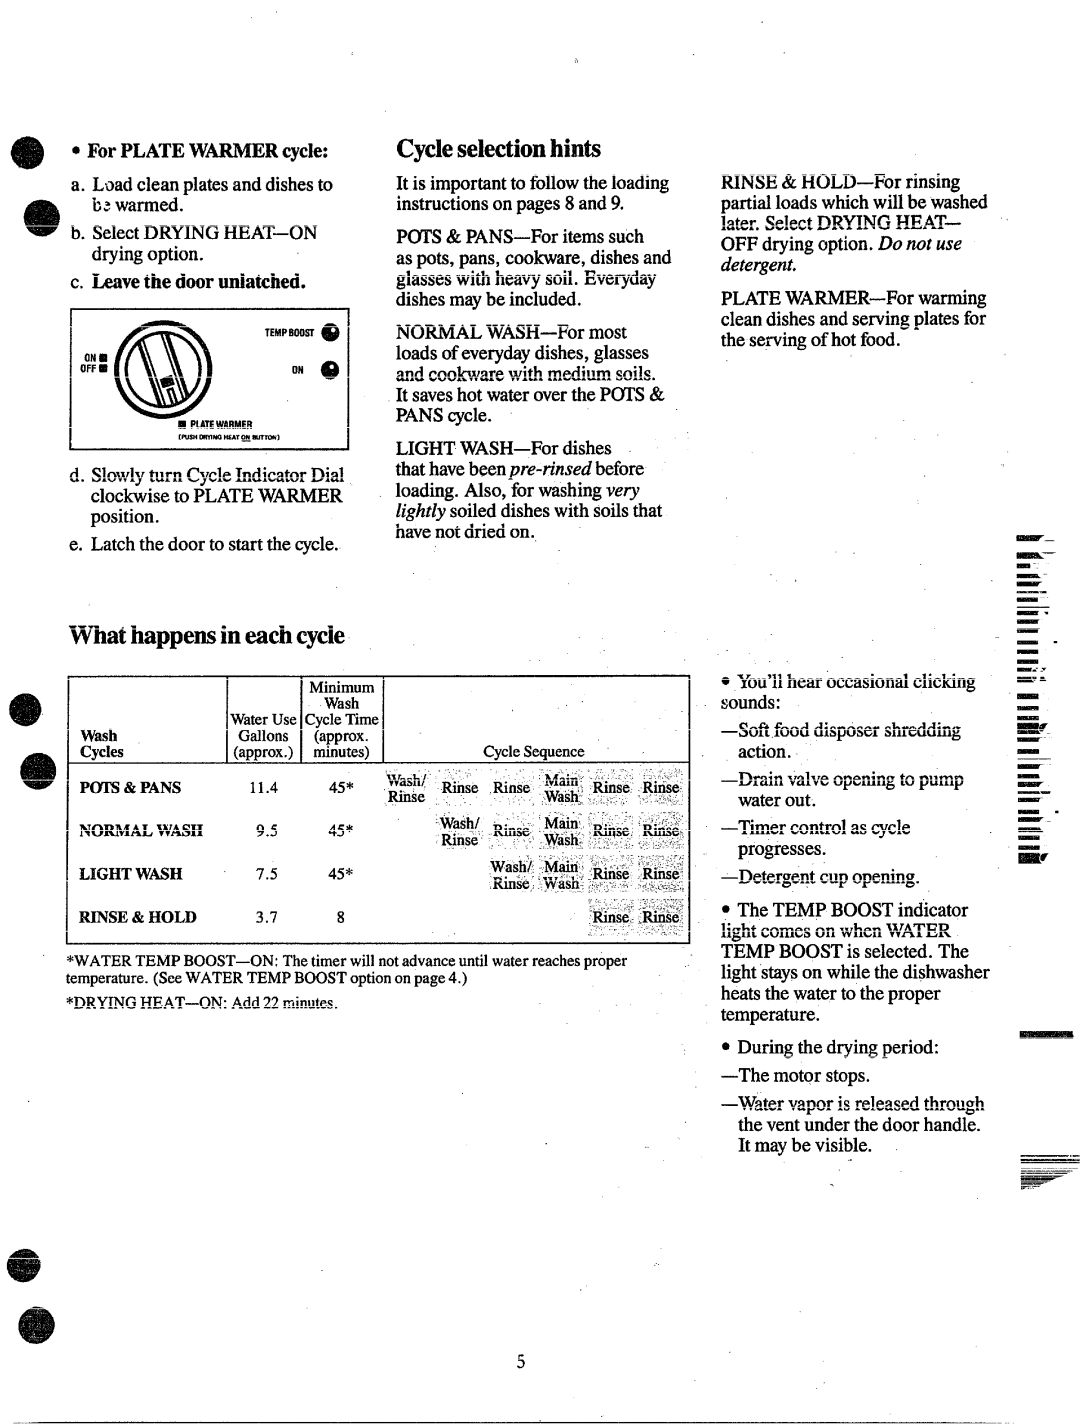 Hotpoint HDA-997 manual Cycleselectionhints, Whathappensin eachcycle 